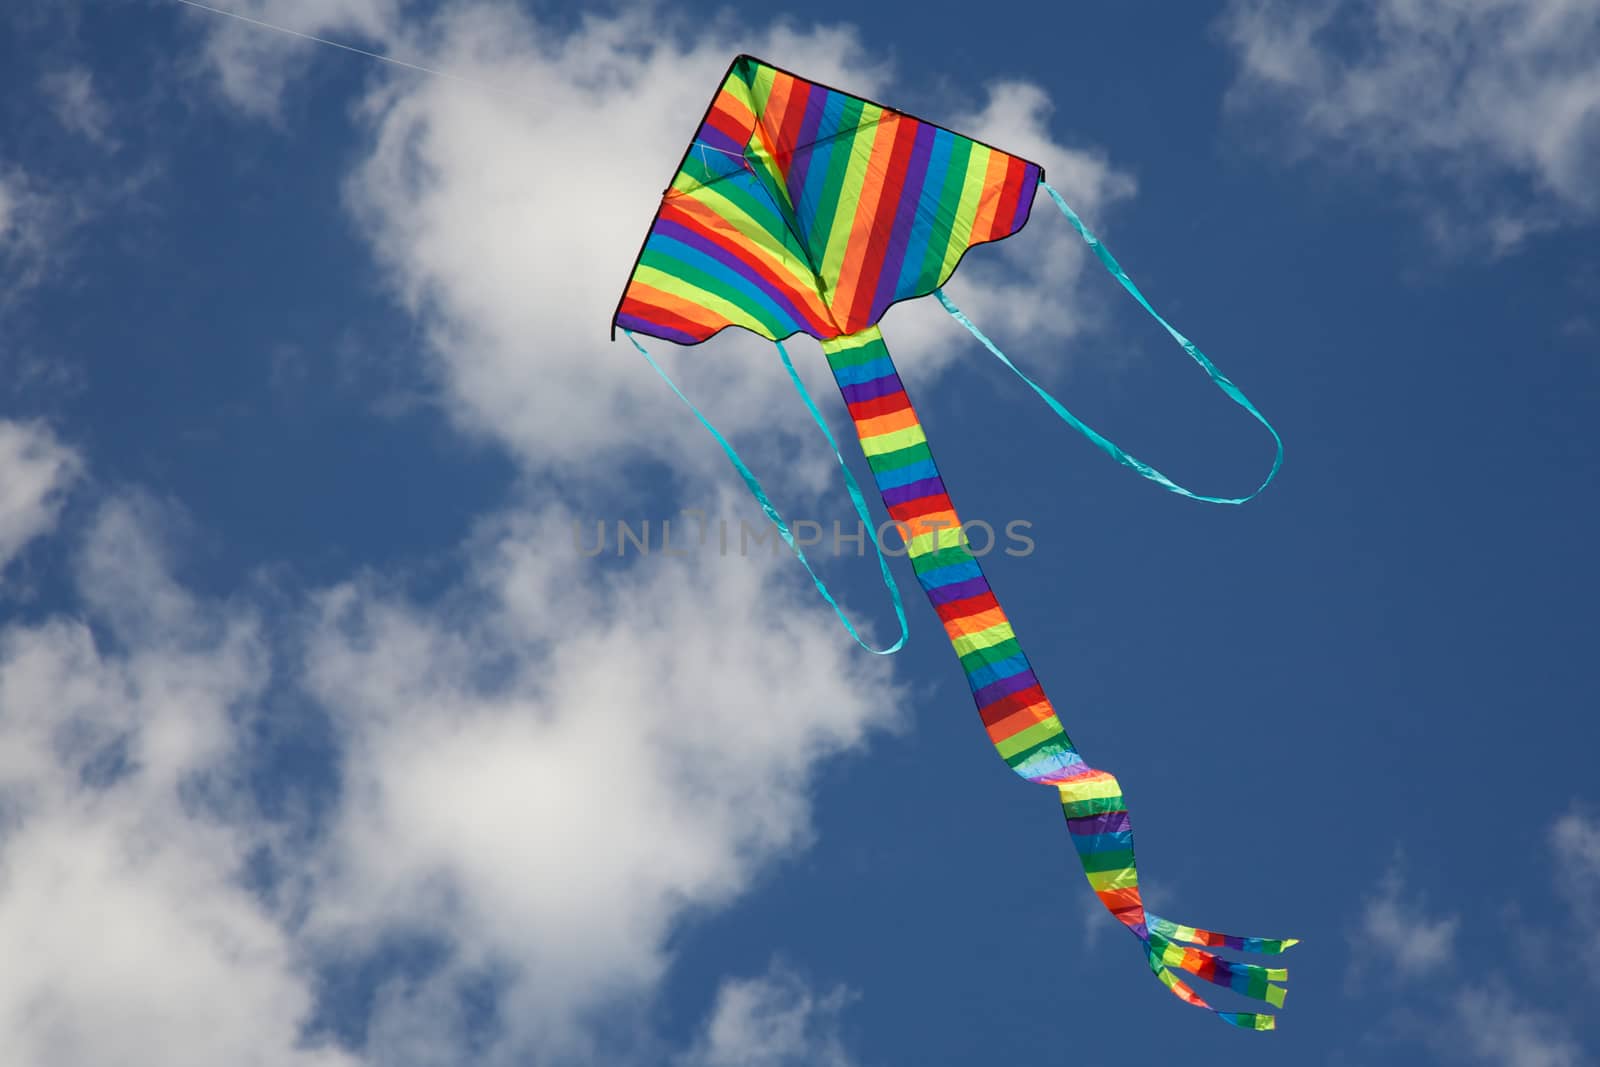 A Flying Kite Close up Image